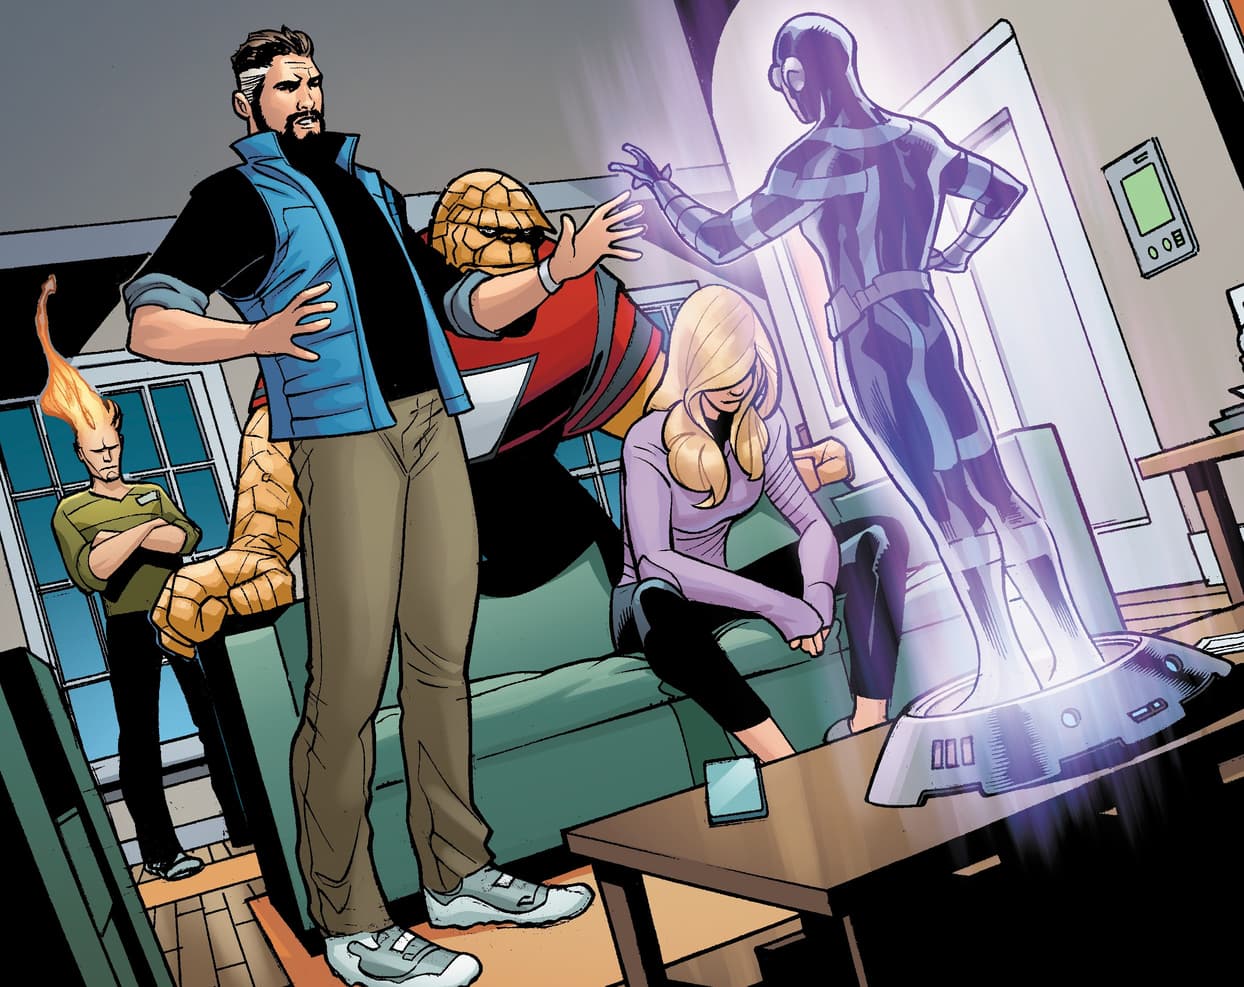 Interior art by Terry Dodson with inks by Rachel Dodson, Karl Story, and Ransom Getty; colors by Laura Martin